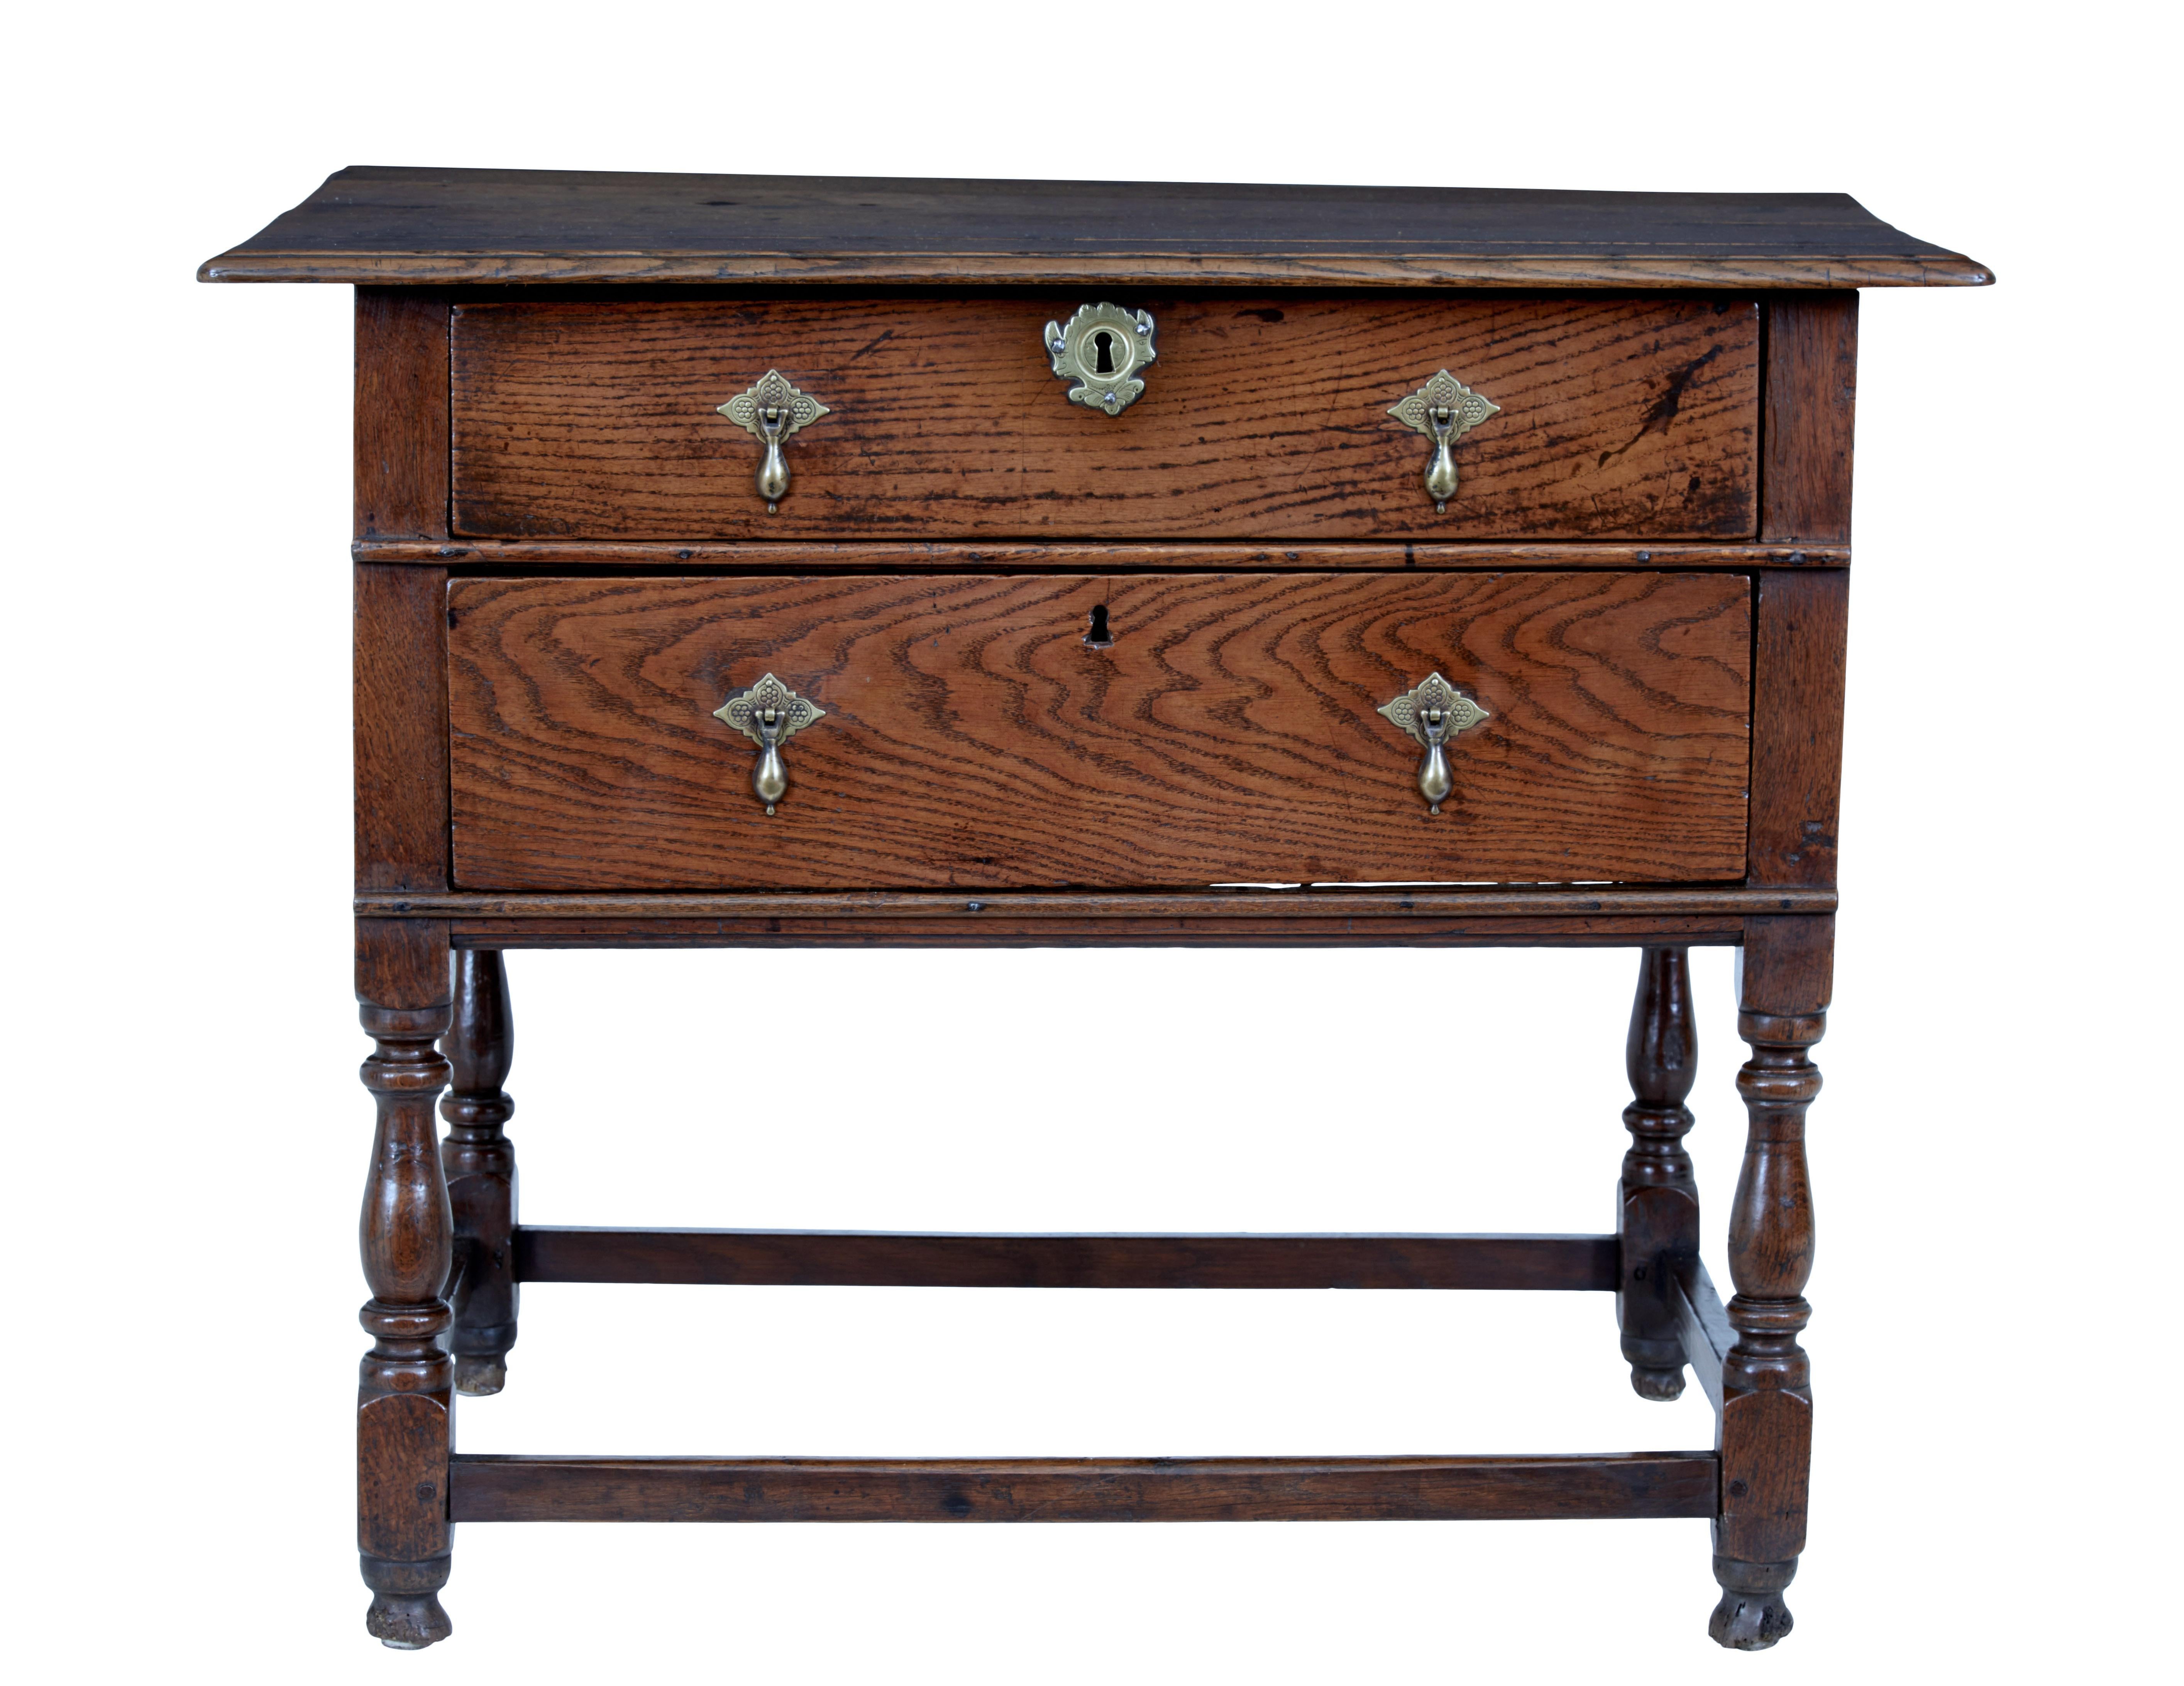 Very rare early 18th century two drawer oak side table, circa 1730.

Over-sailing 4 plank oak top, with 2 deep drawers below, fitted with ornate brass droplet handles and escutheons. Standing on 4 turned legs united by stretcher.

Great colour